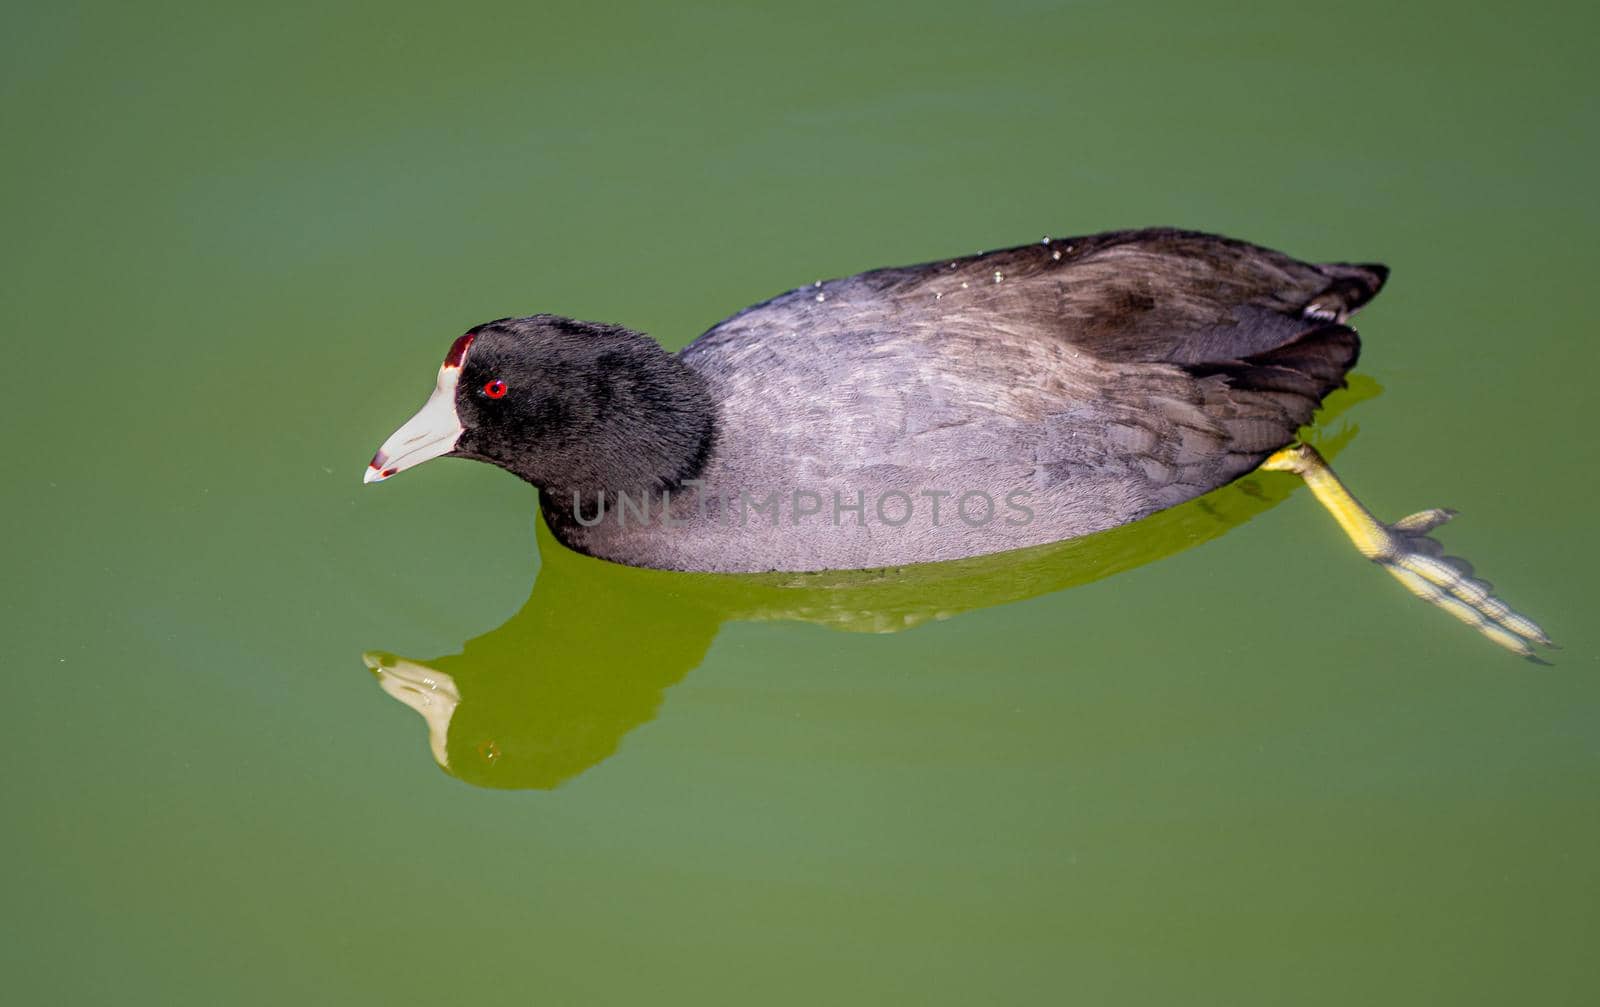 PIcture of American Coot swimming and enjoying its own reflection with selective focus on the bird and reflection in the water